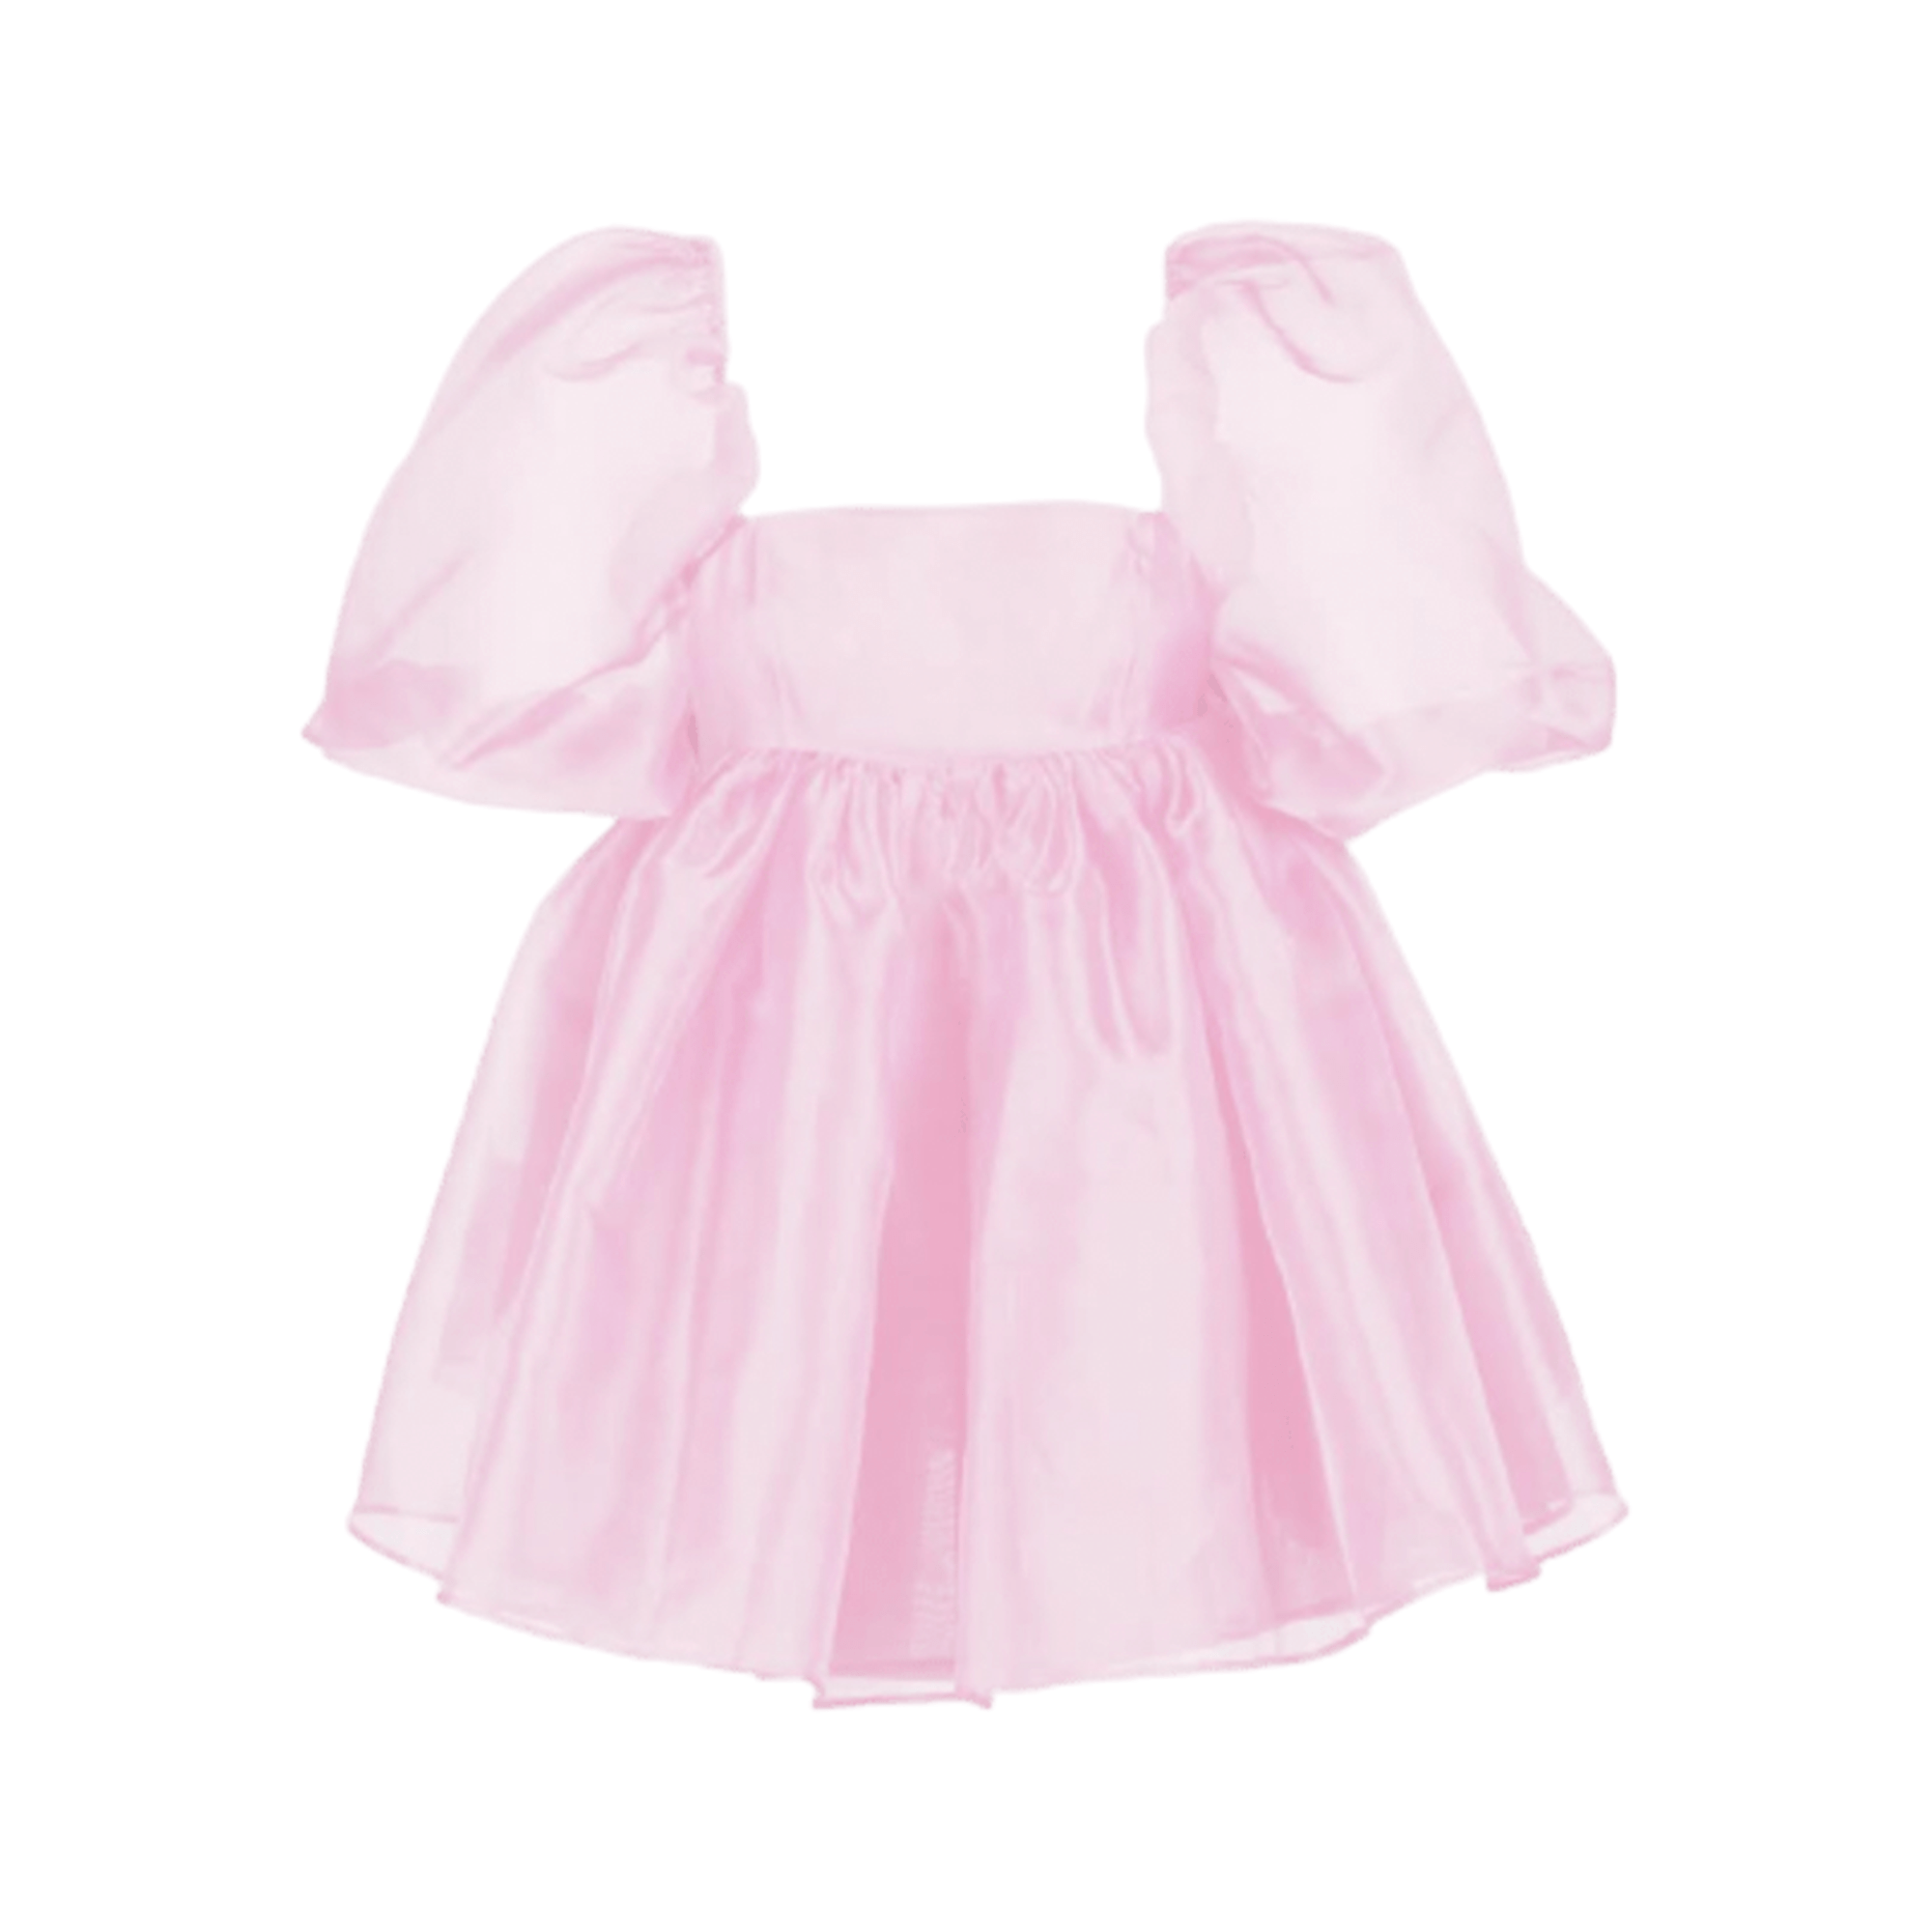 Angel Delight Puff Dress in Pink